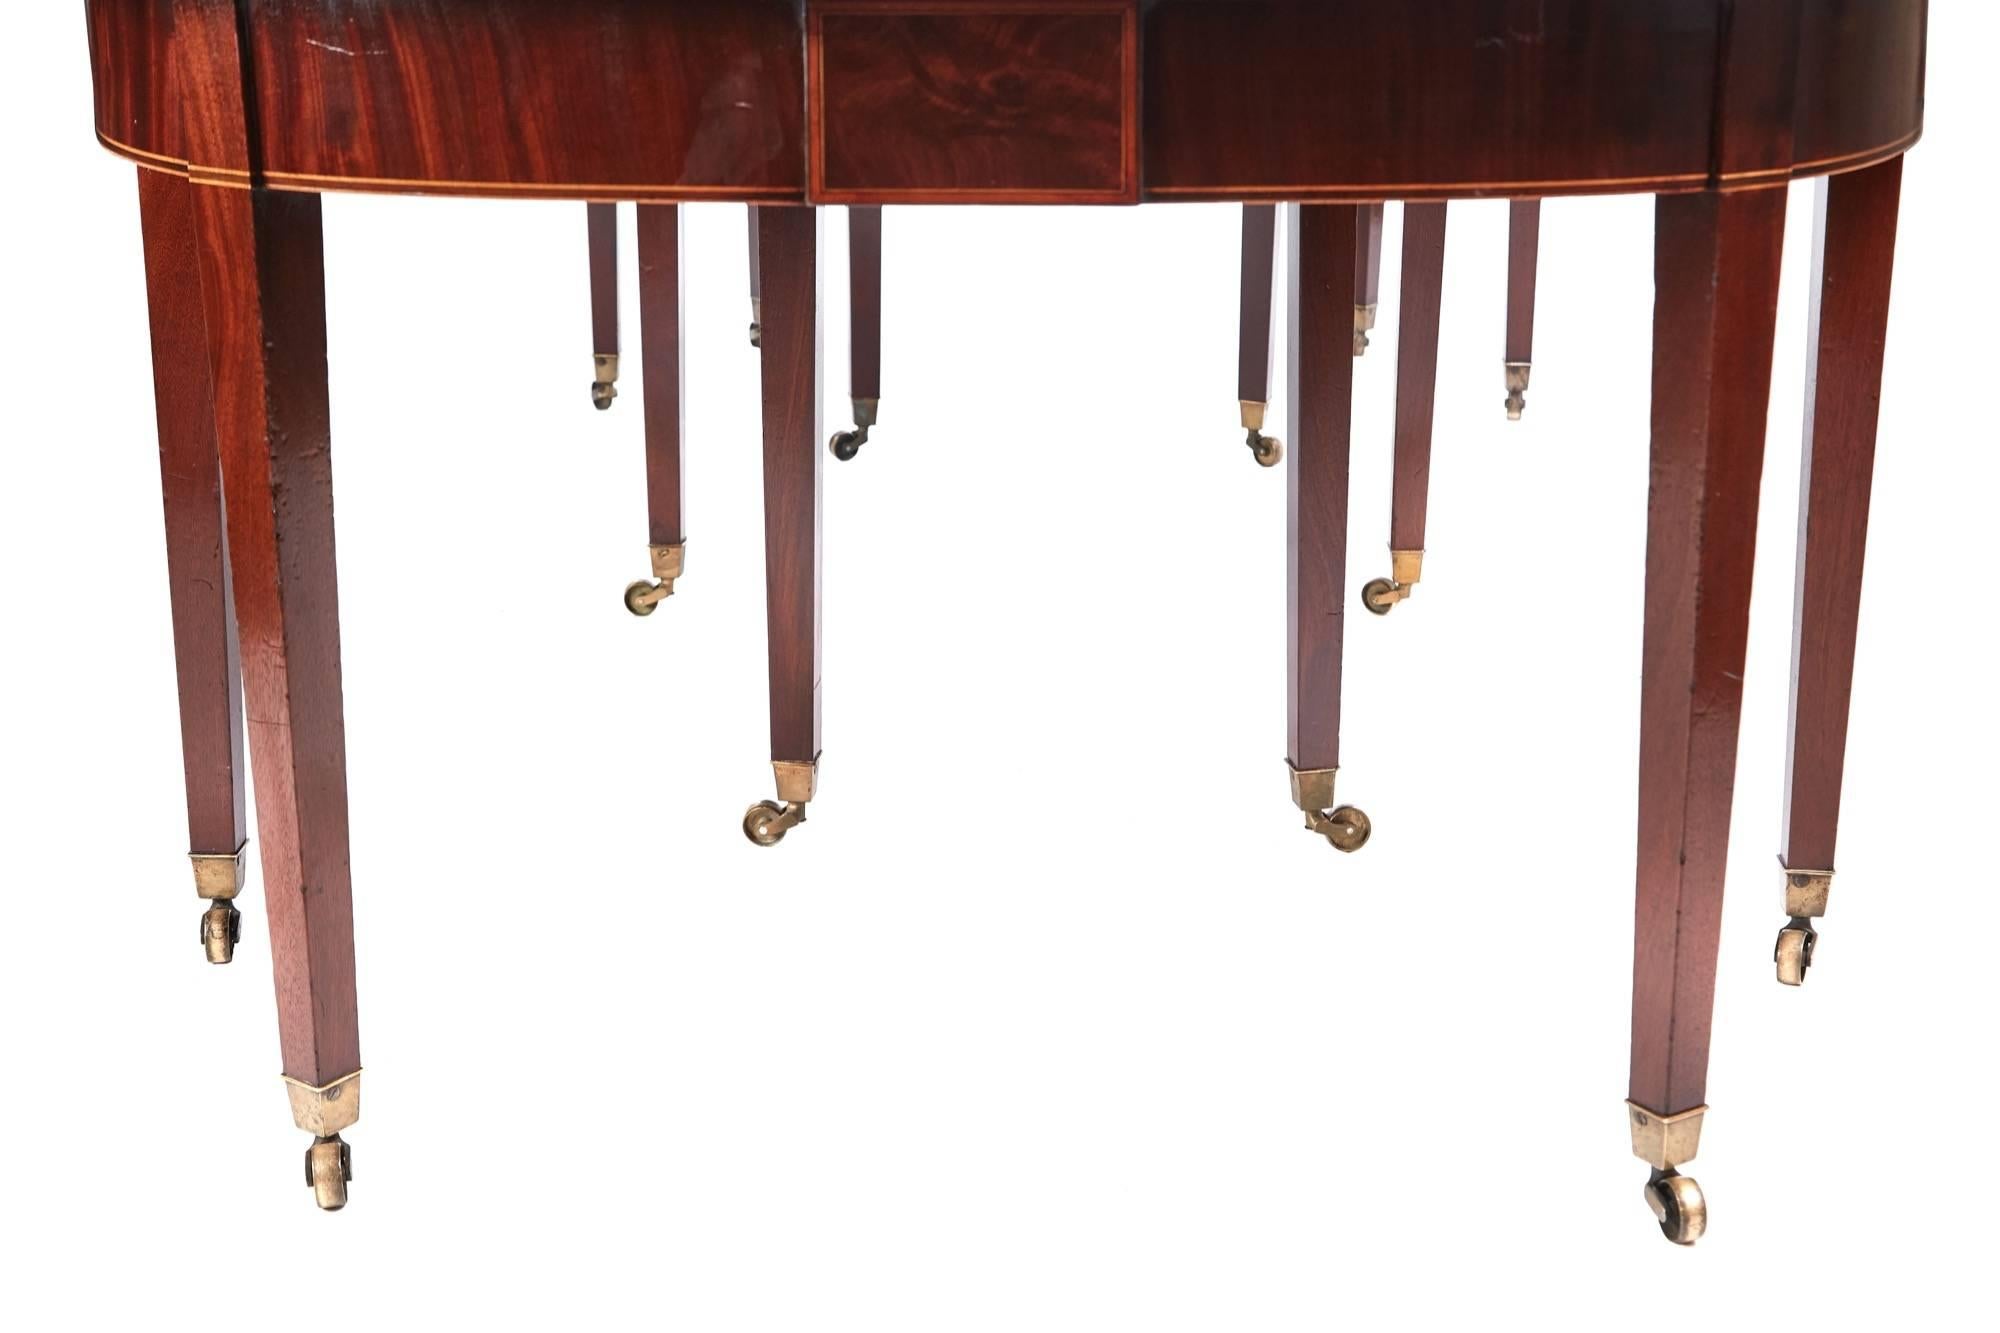 Fine George III mahogany dining table, having a fantastic solid mahogany top with a reeded edge, lovely inlaid frieze, drop leaf table to the centre, standing on 14 square tapering legs with original brass castors, all original
This table also